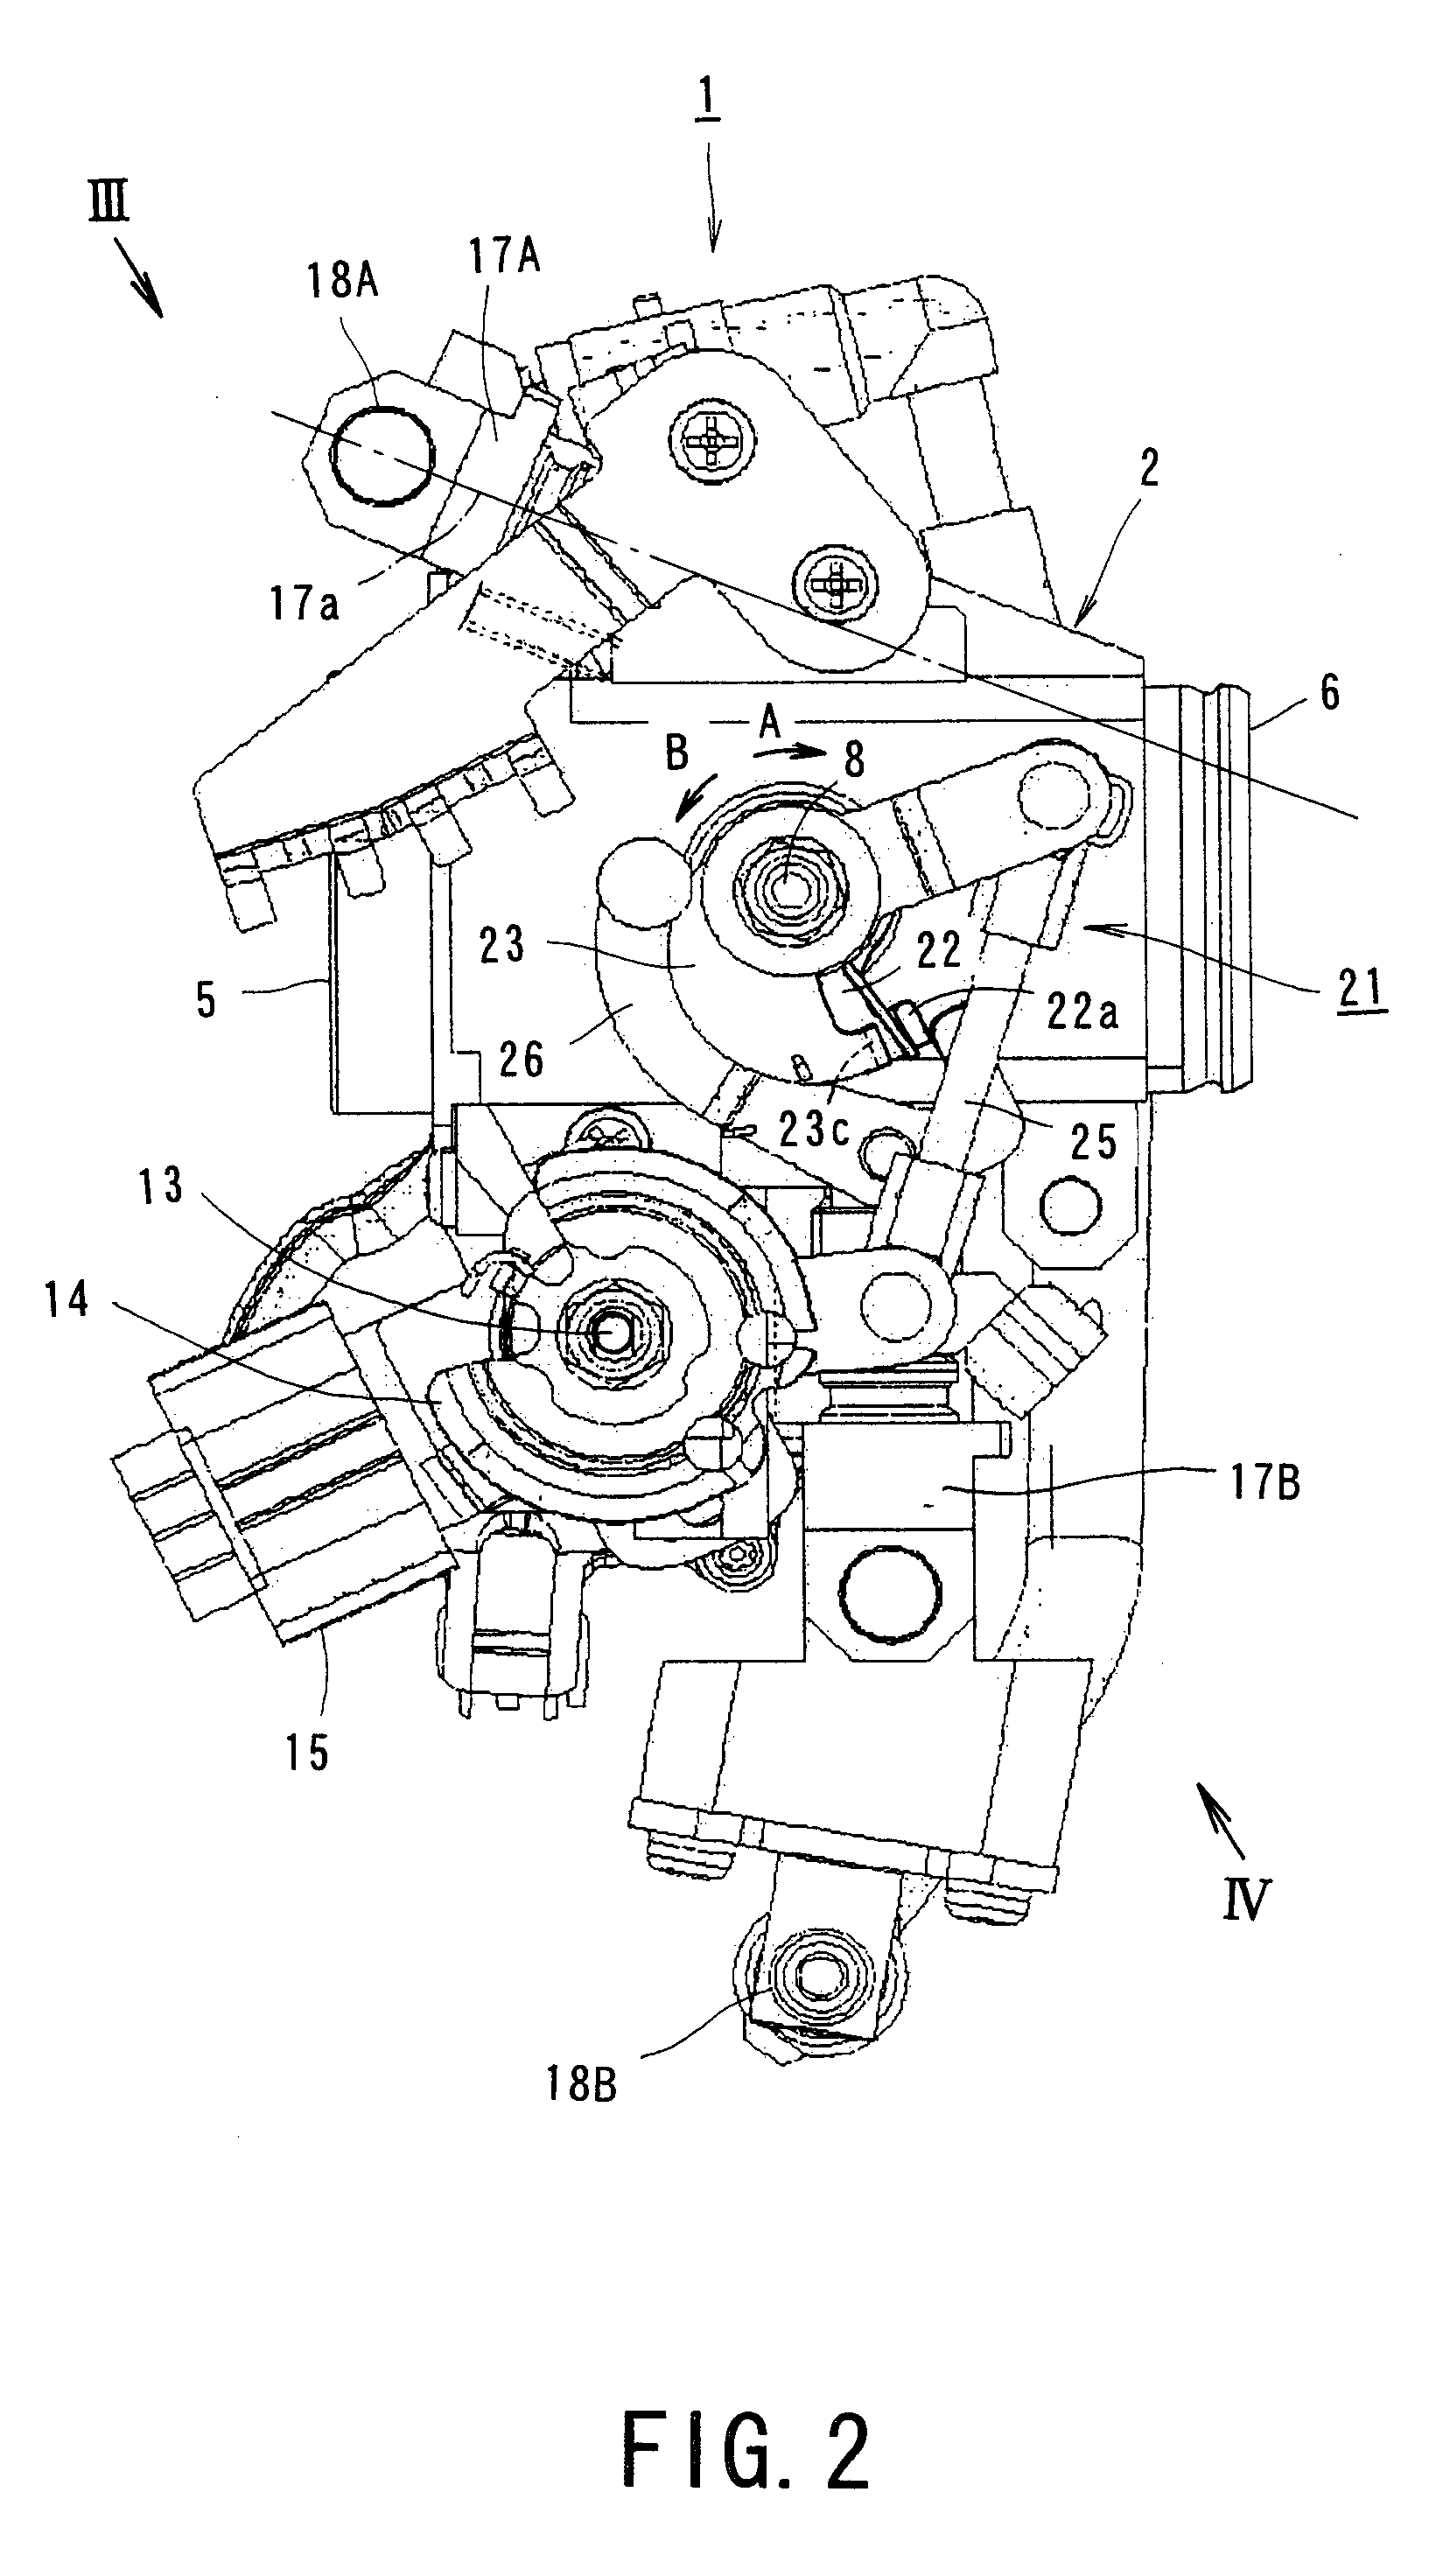 Electronically controlled throttle valve unit